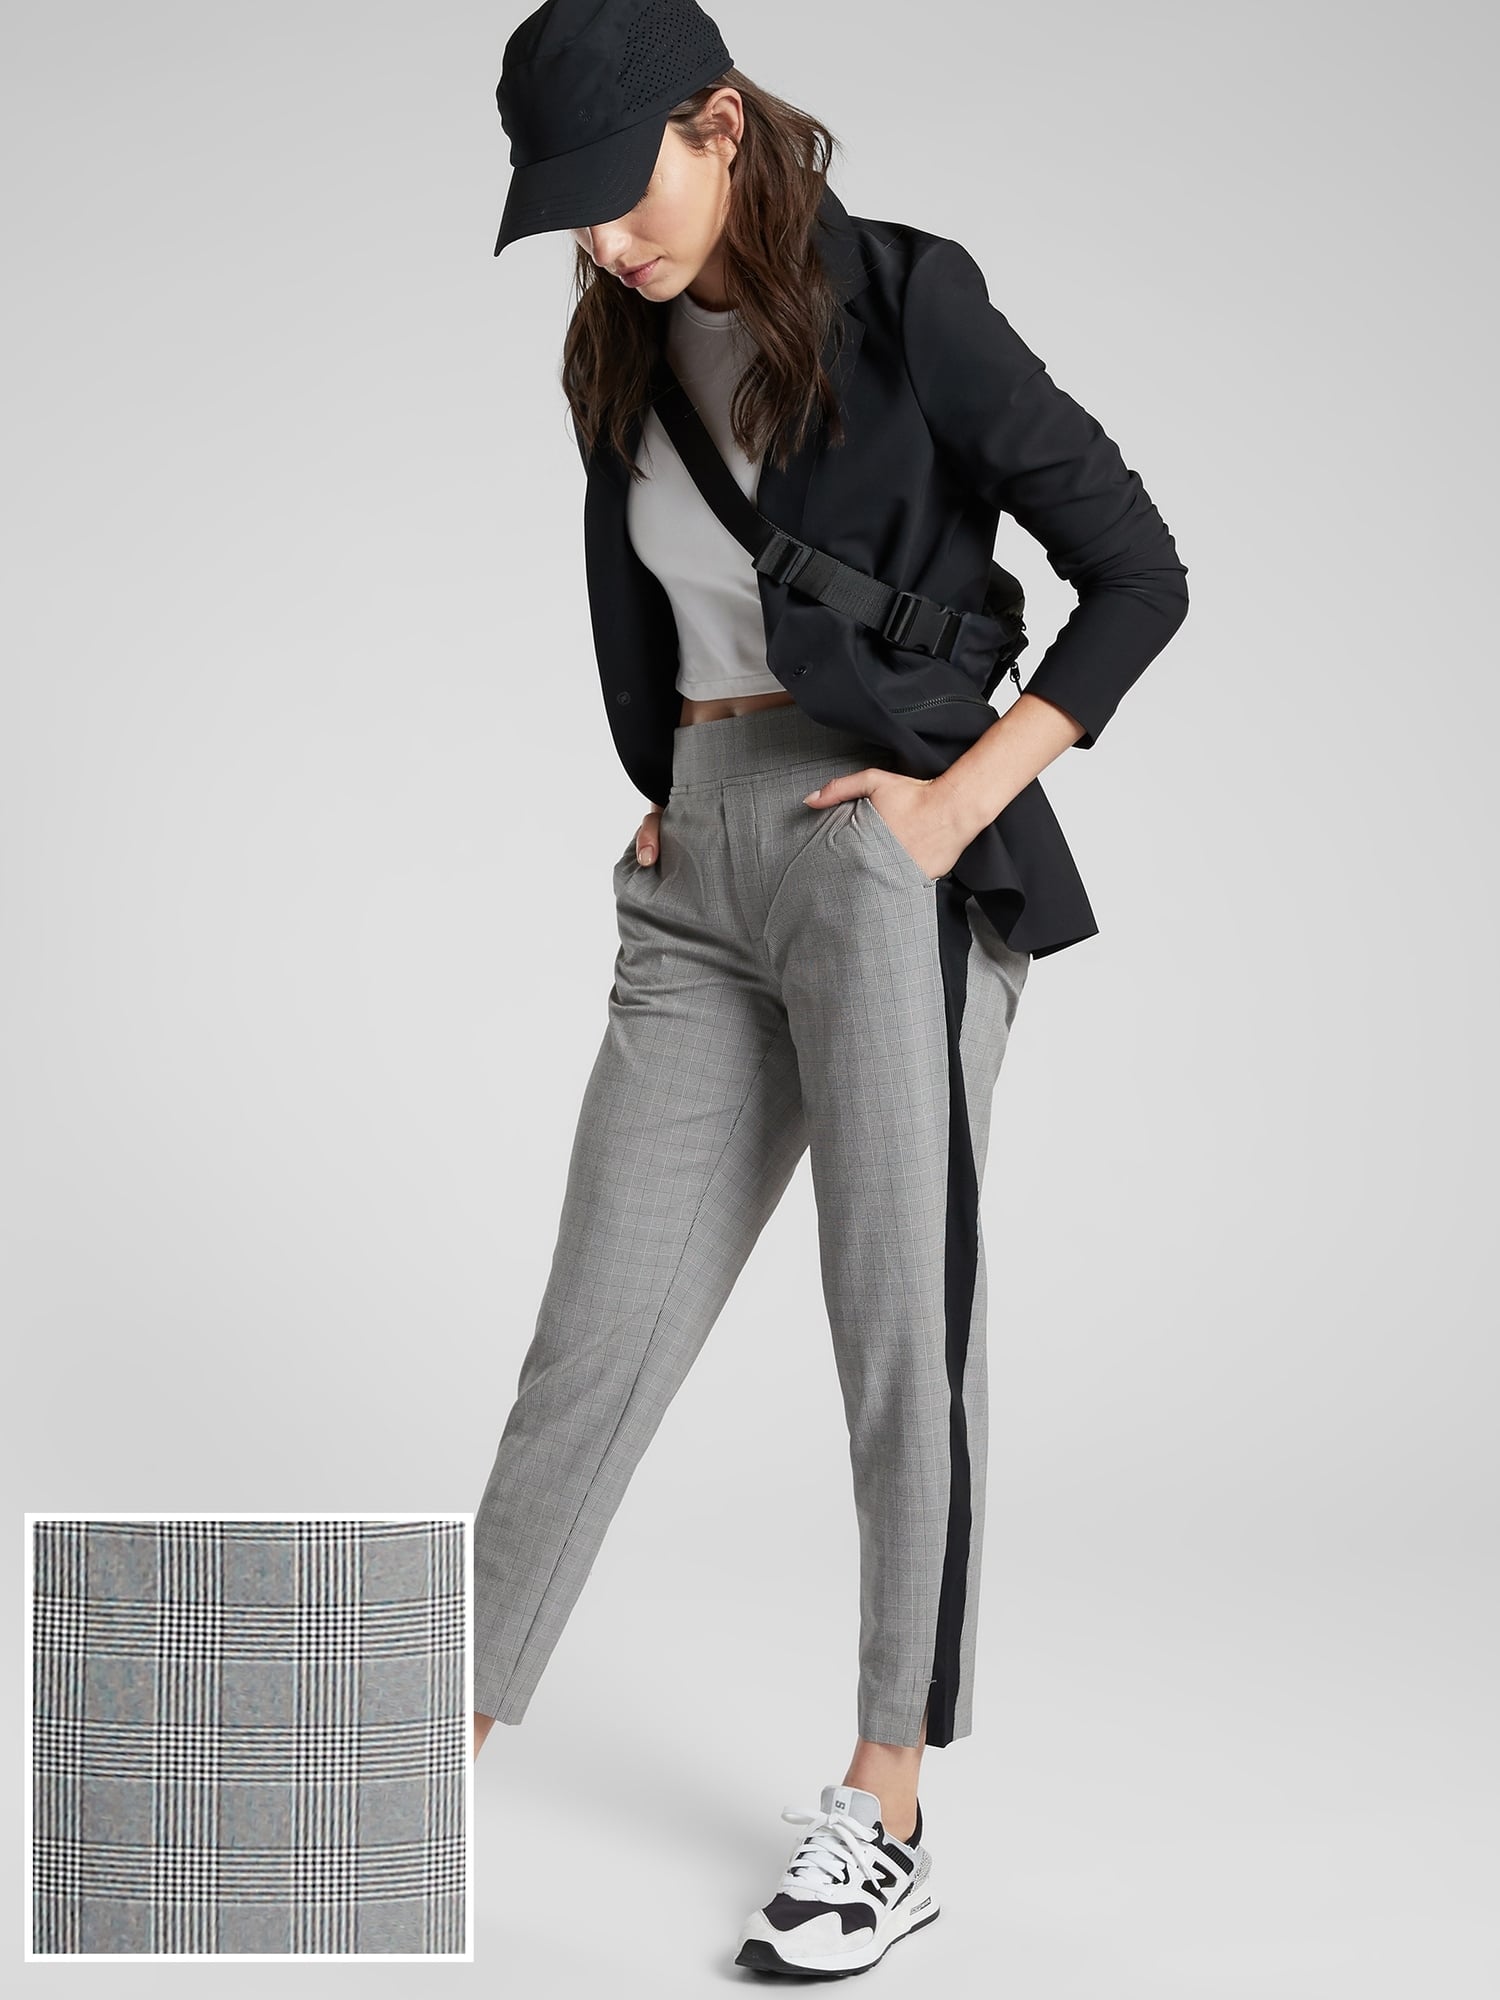 Athleta Brooklyn Plaid Ankle Pant  There's a Big Sale at Athleta